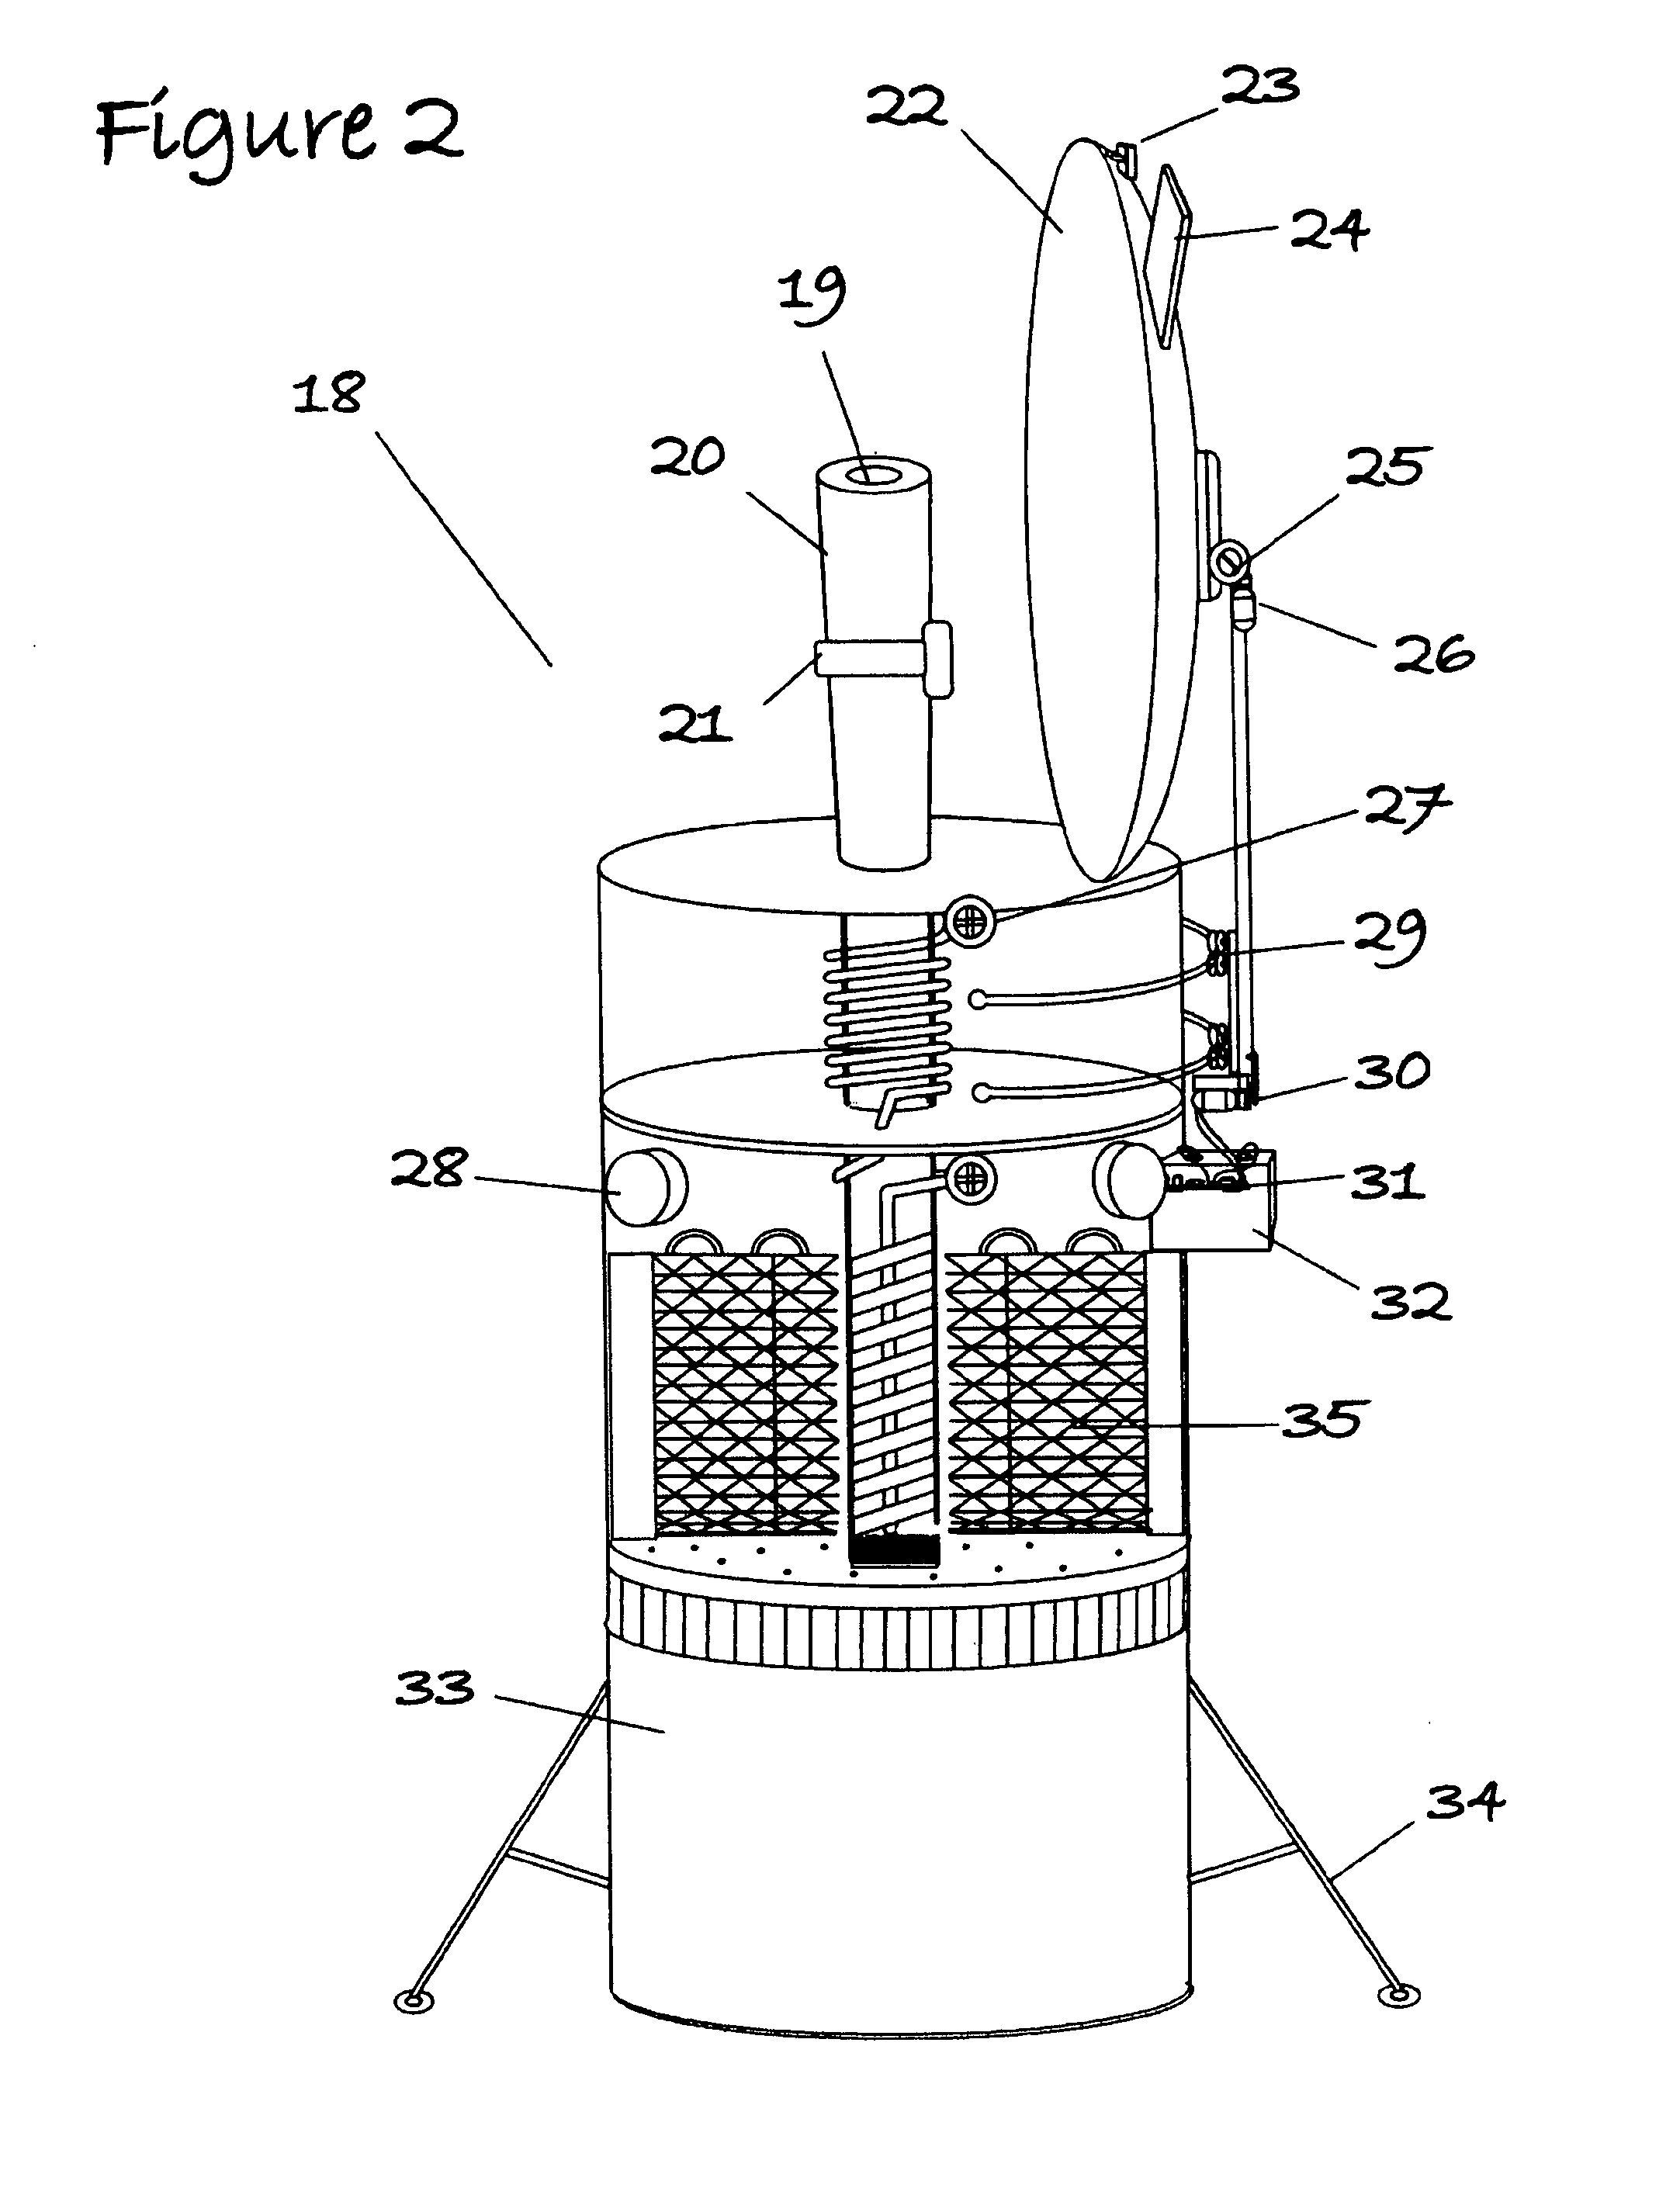 Atmospheric water collection device